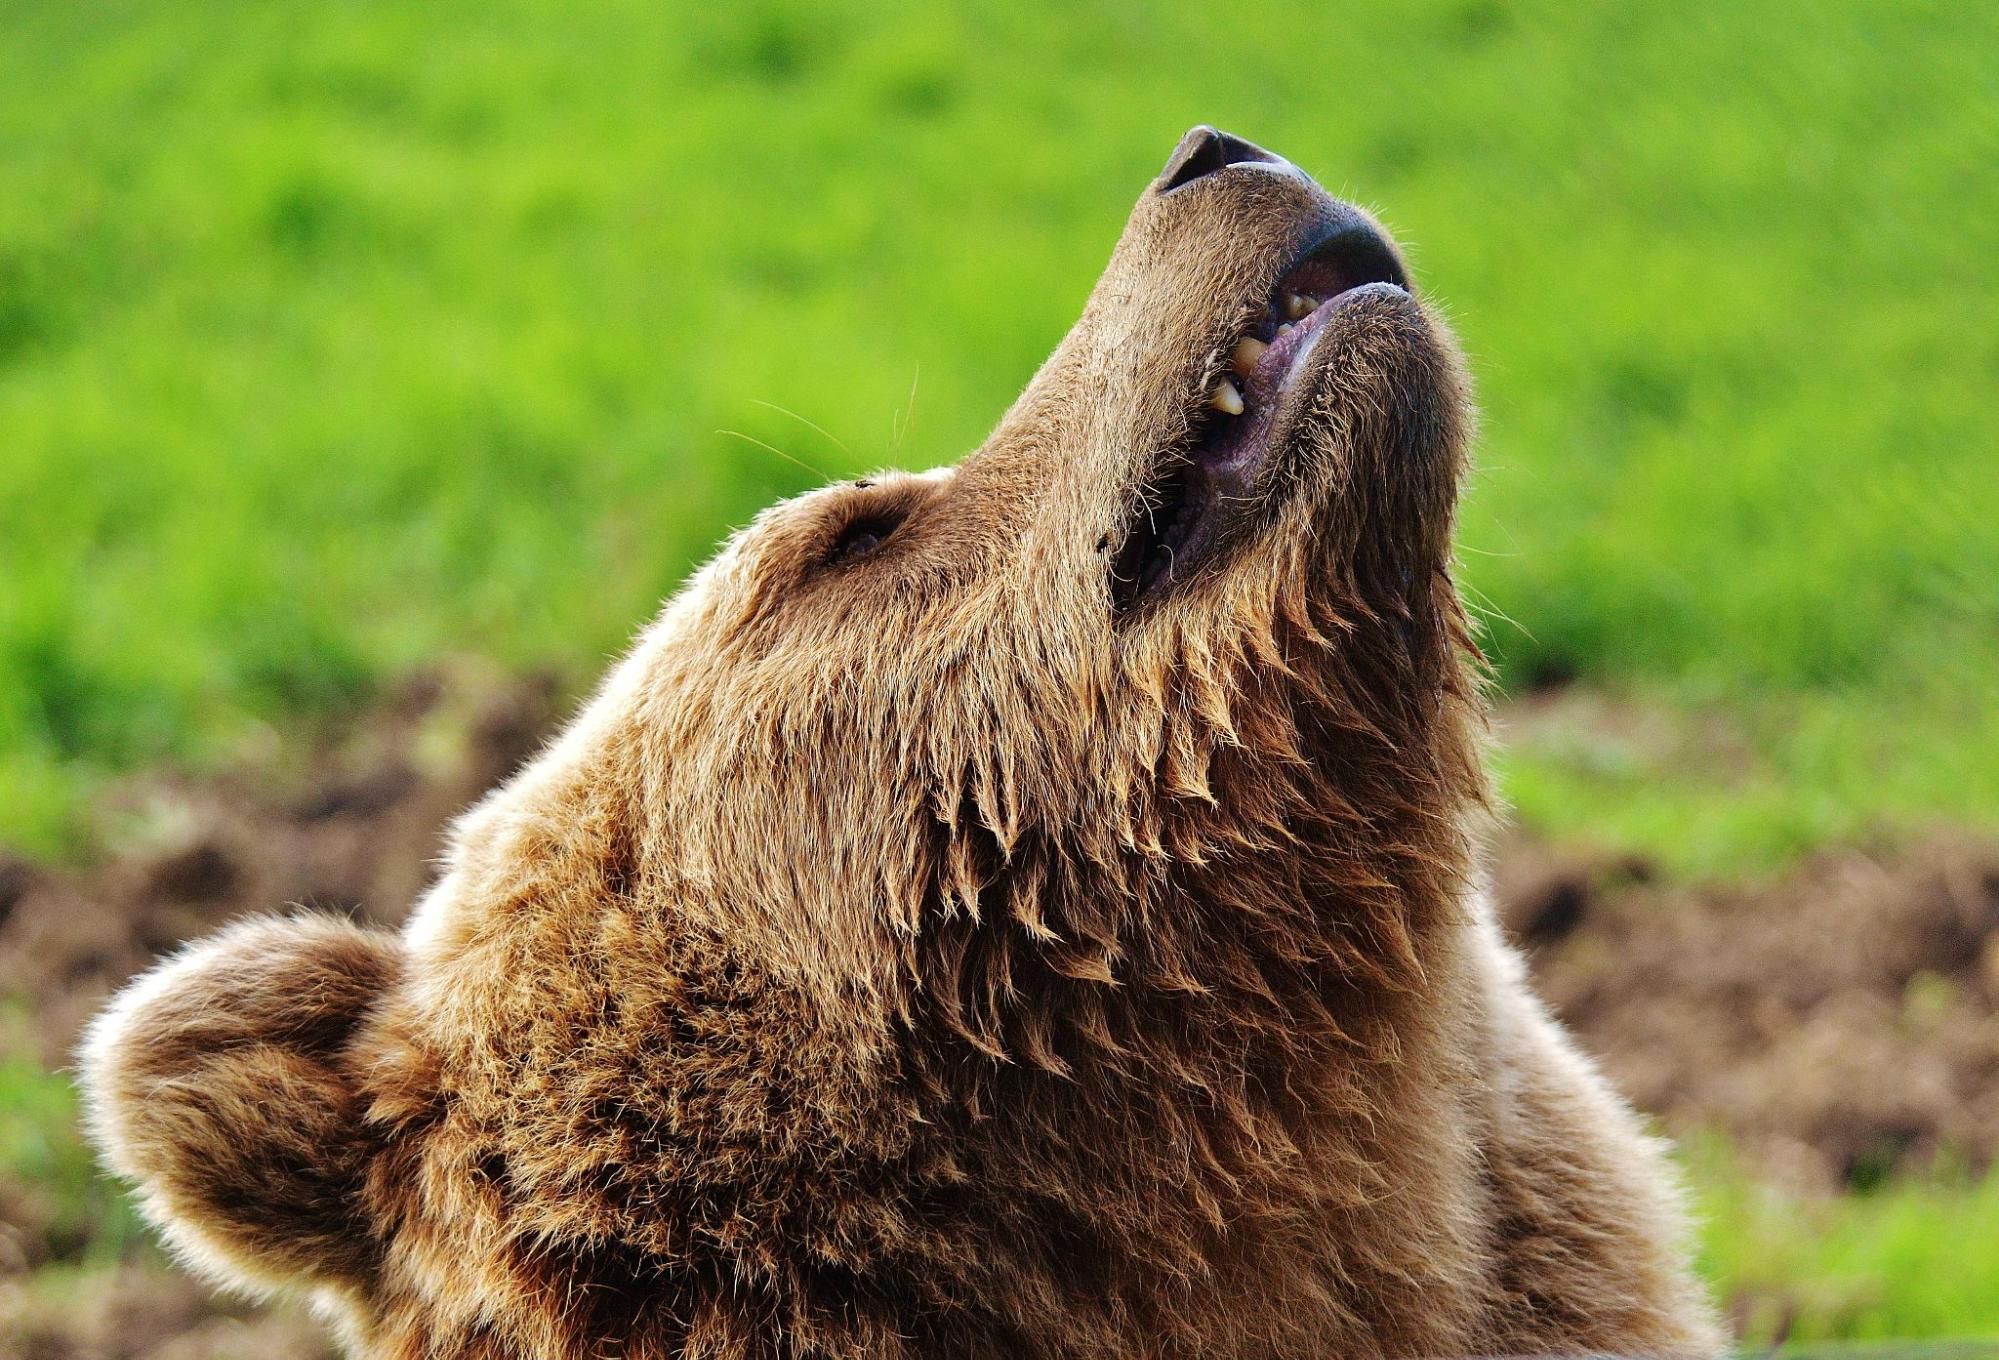 In 2010, grizzly bears were listed as a threatened species in Alberta. There were as few as 700 remaining in the province. That number grew to just under 1,000 in 2021 | Pixabay | Pexels